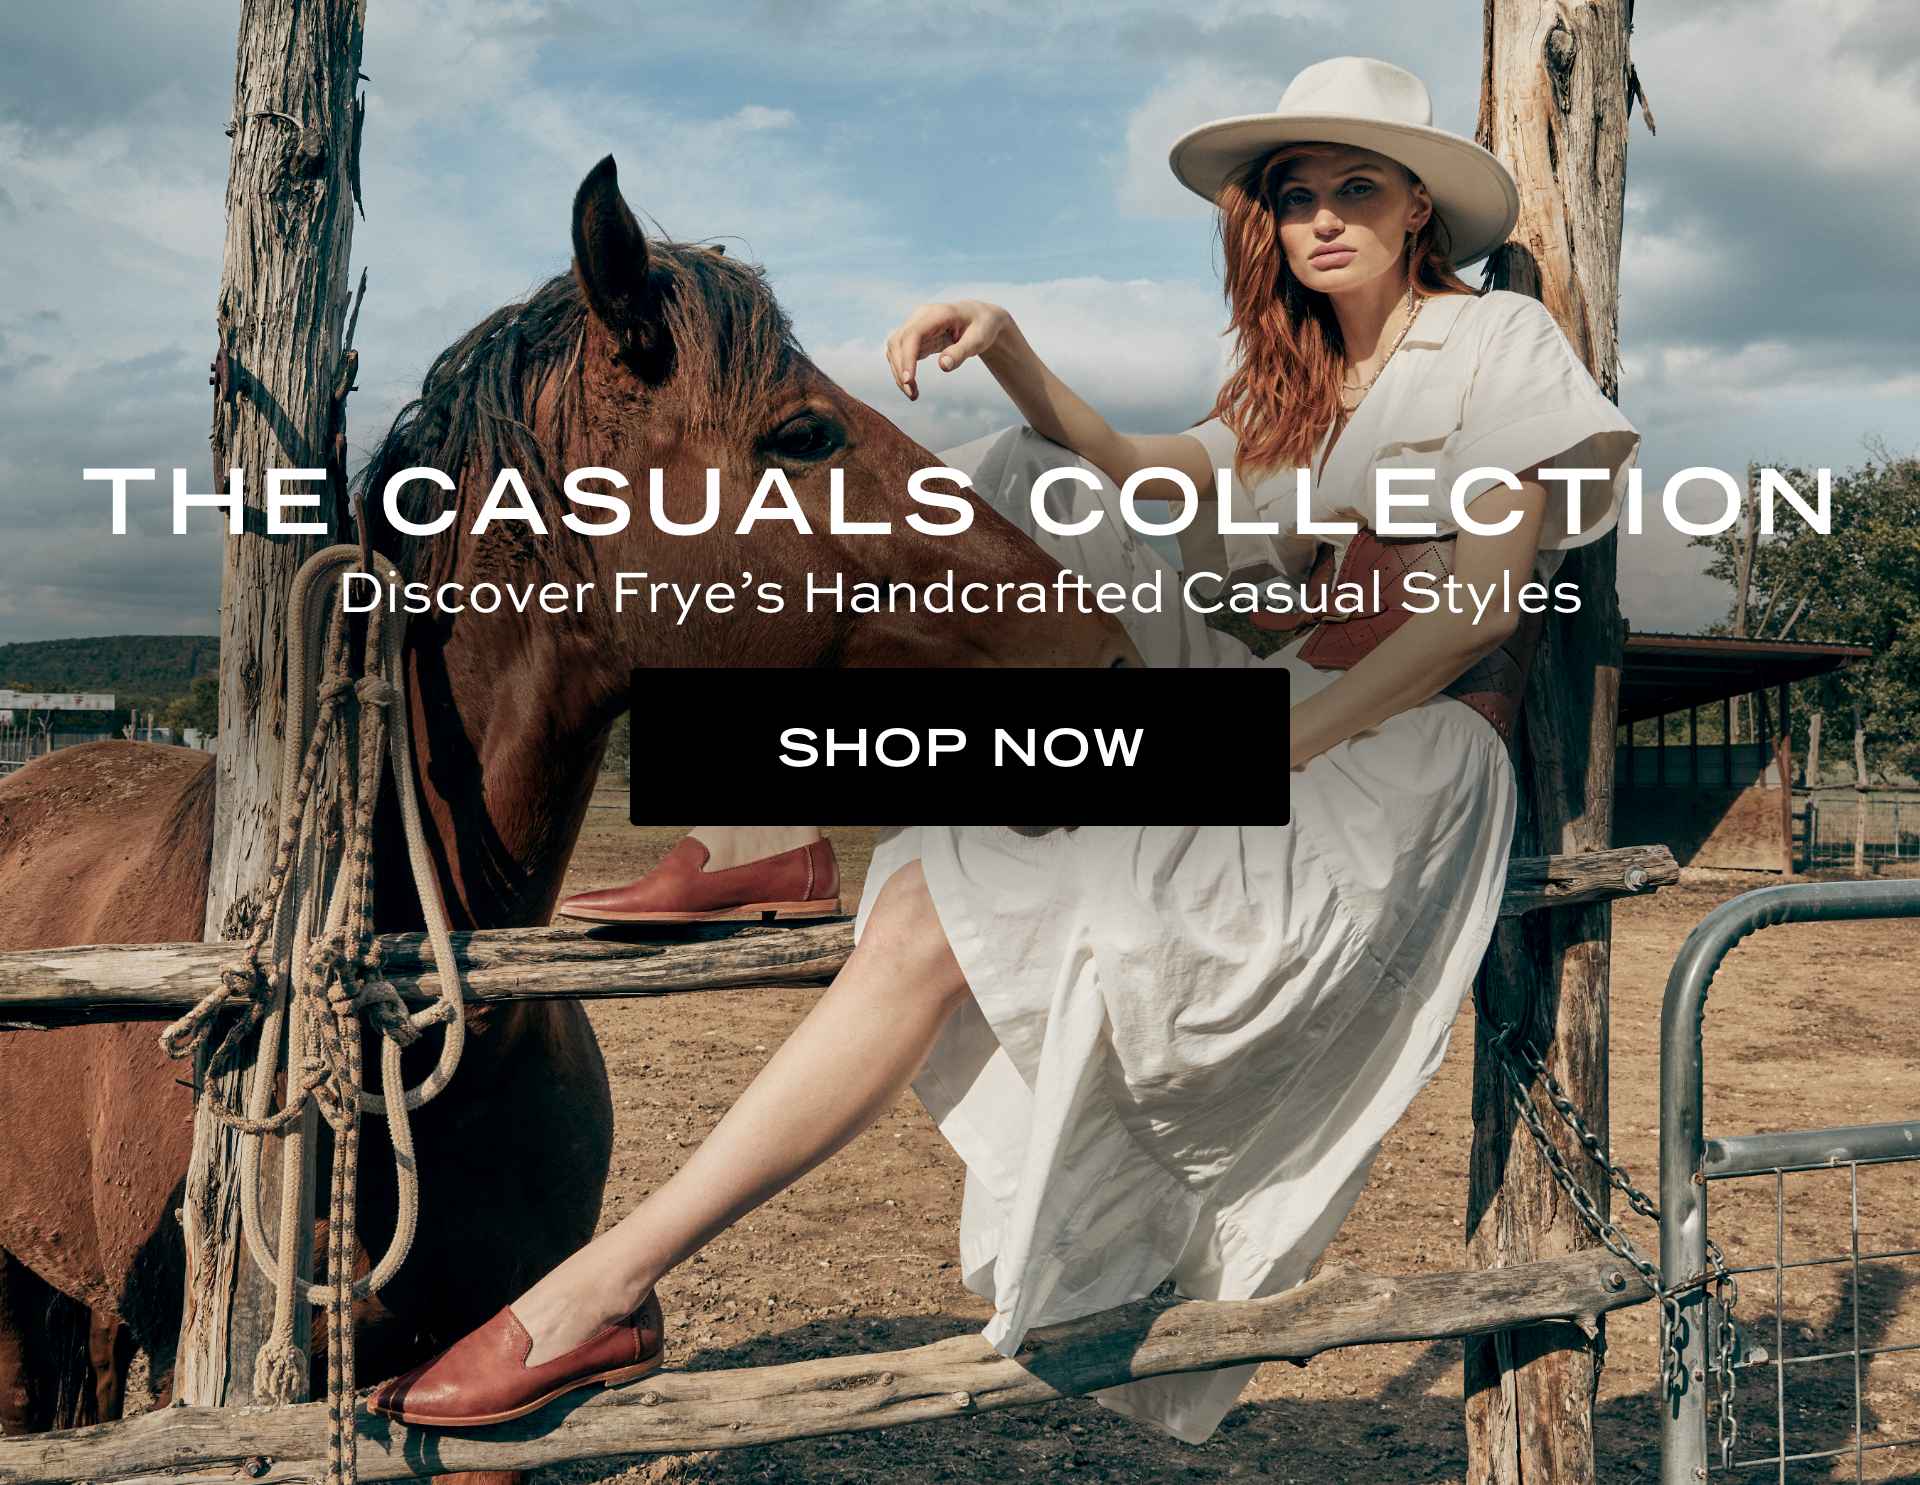 SHOP CASUALS COLLECTION NOW